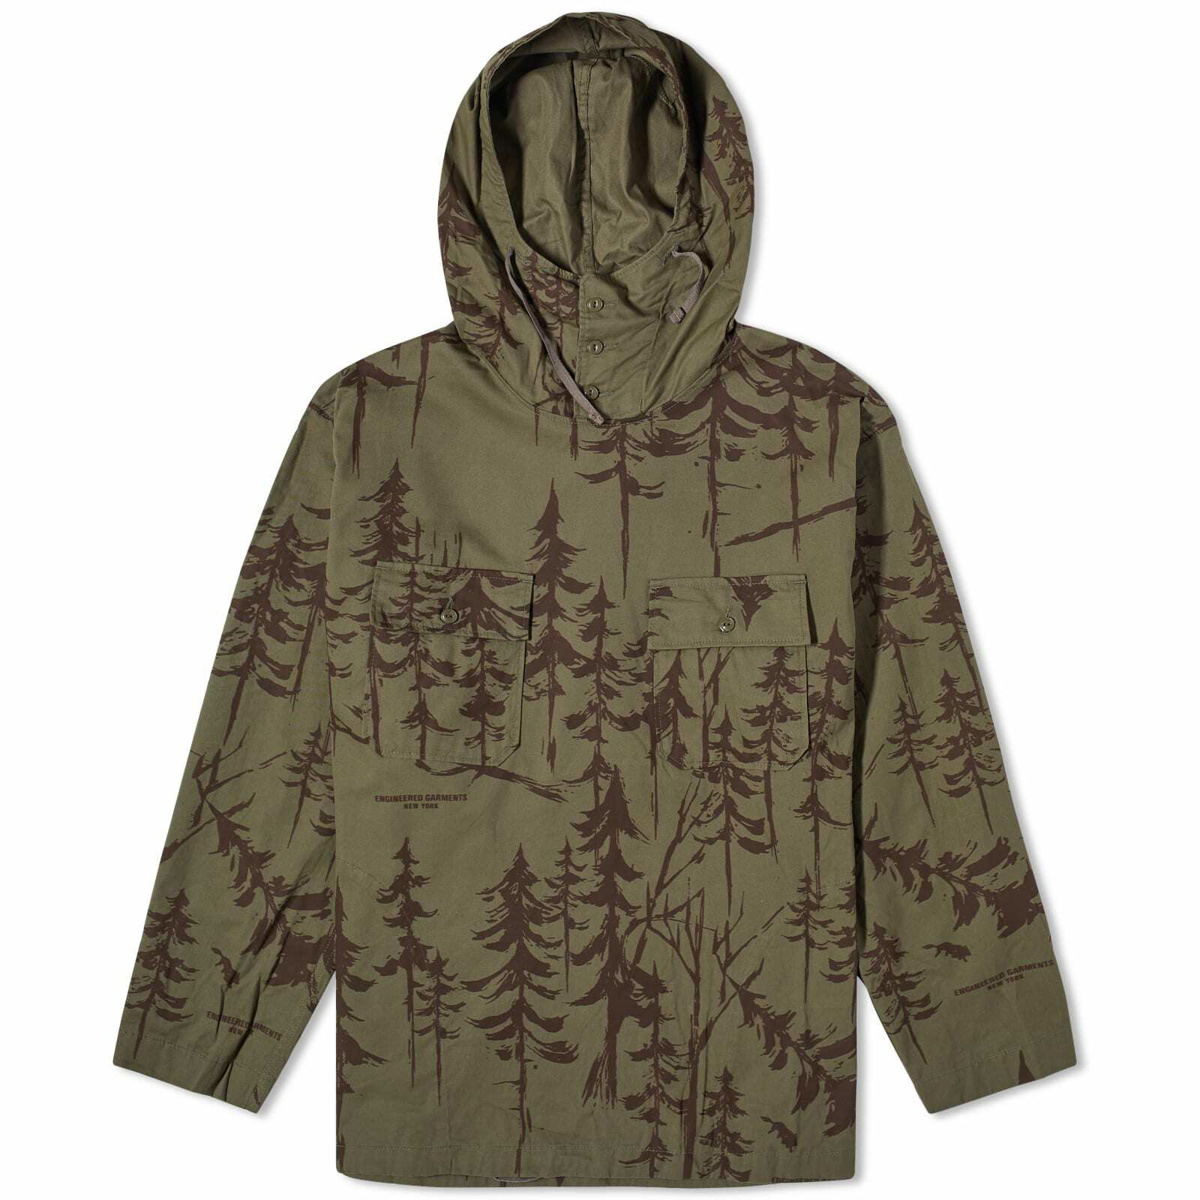 Engineered Garments Men's Cagoule Shirt in Olive Forest Print ...